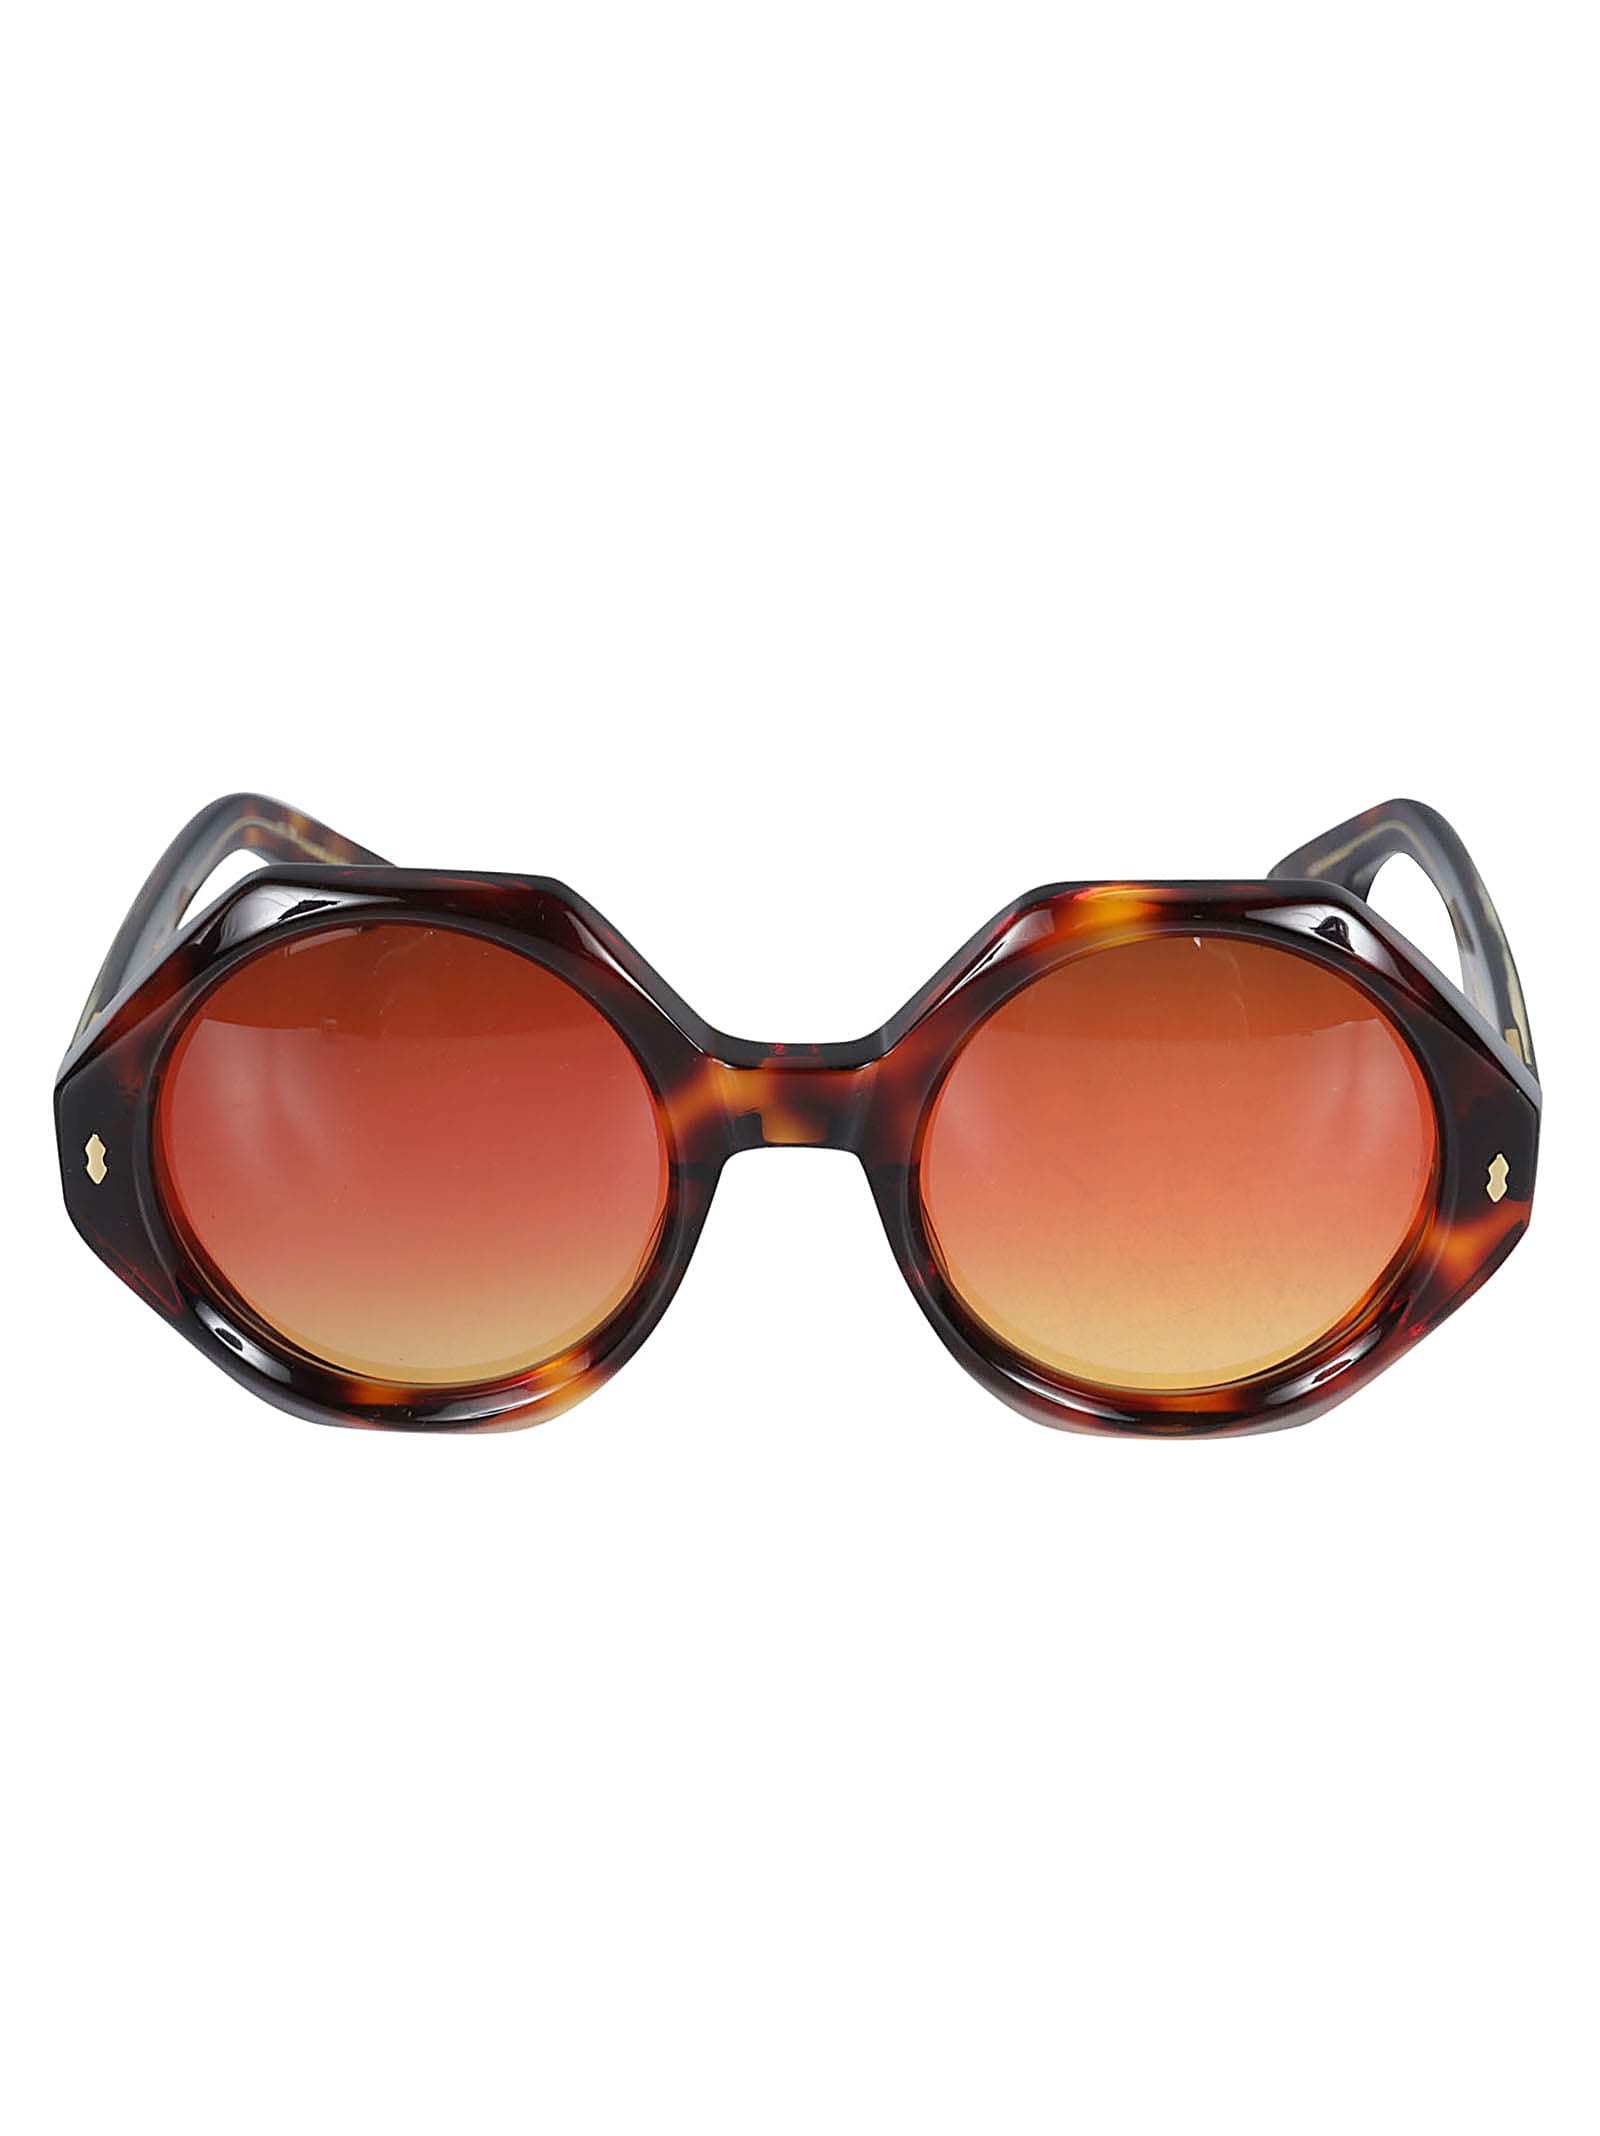 Jacques Marie Mage Heptagon Frame Sunglasses In Adobe